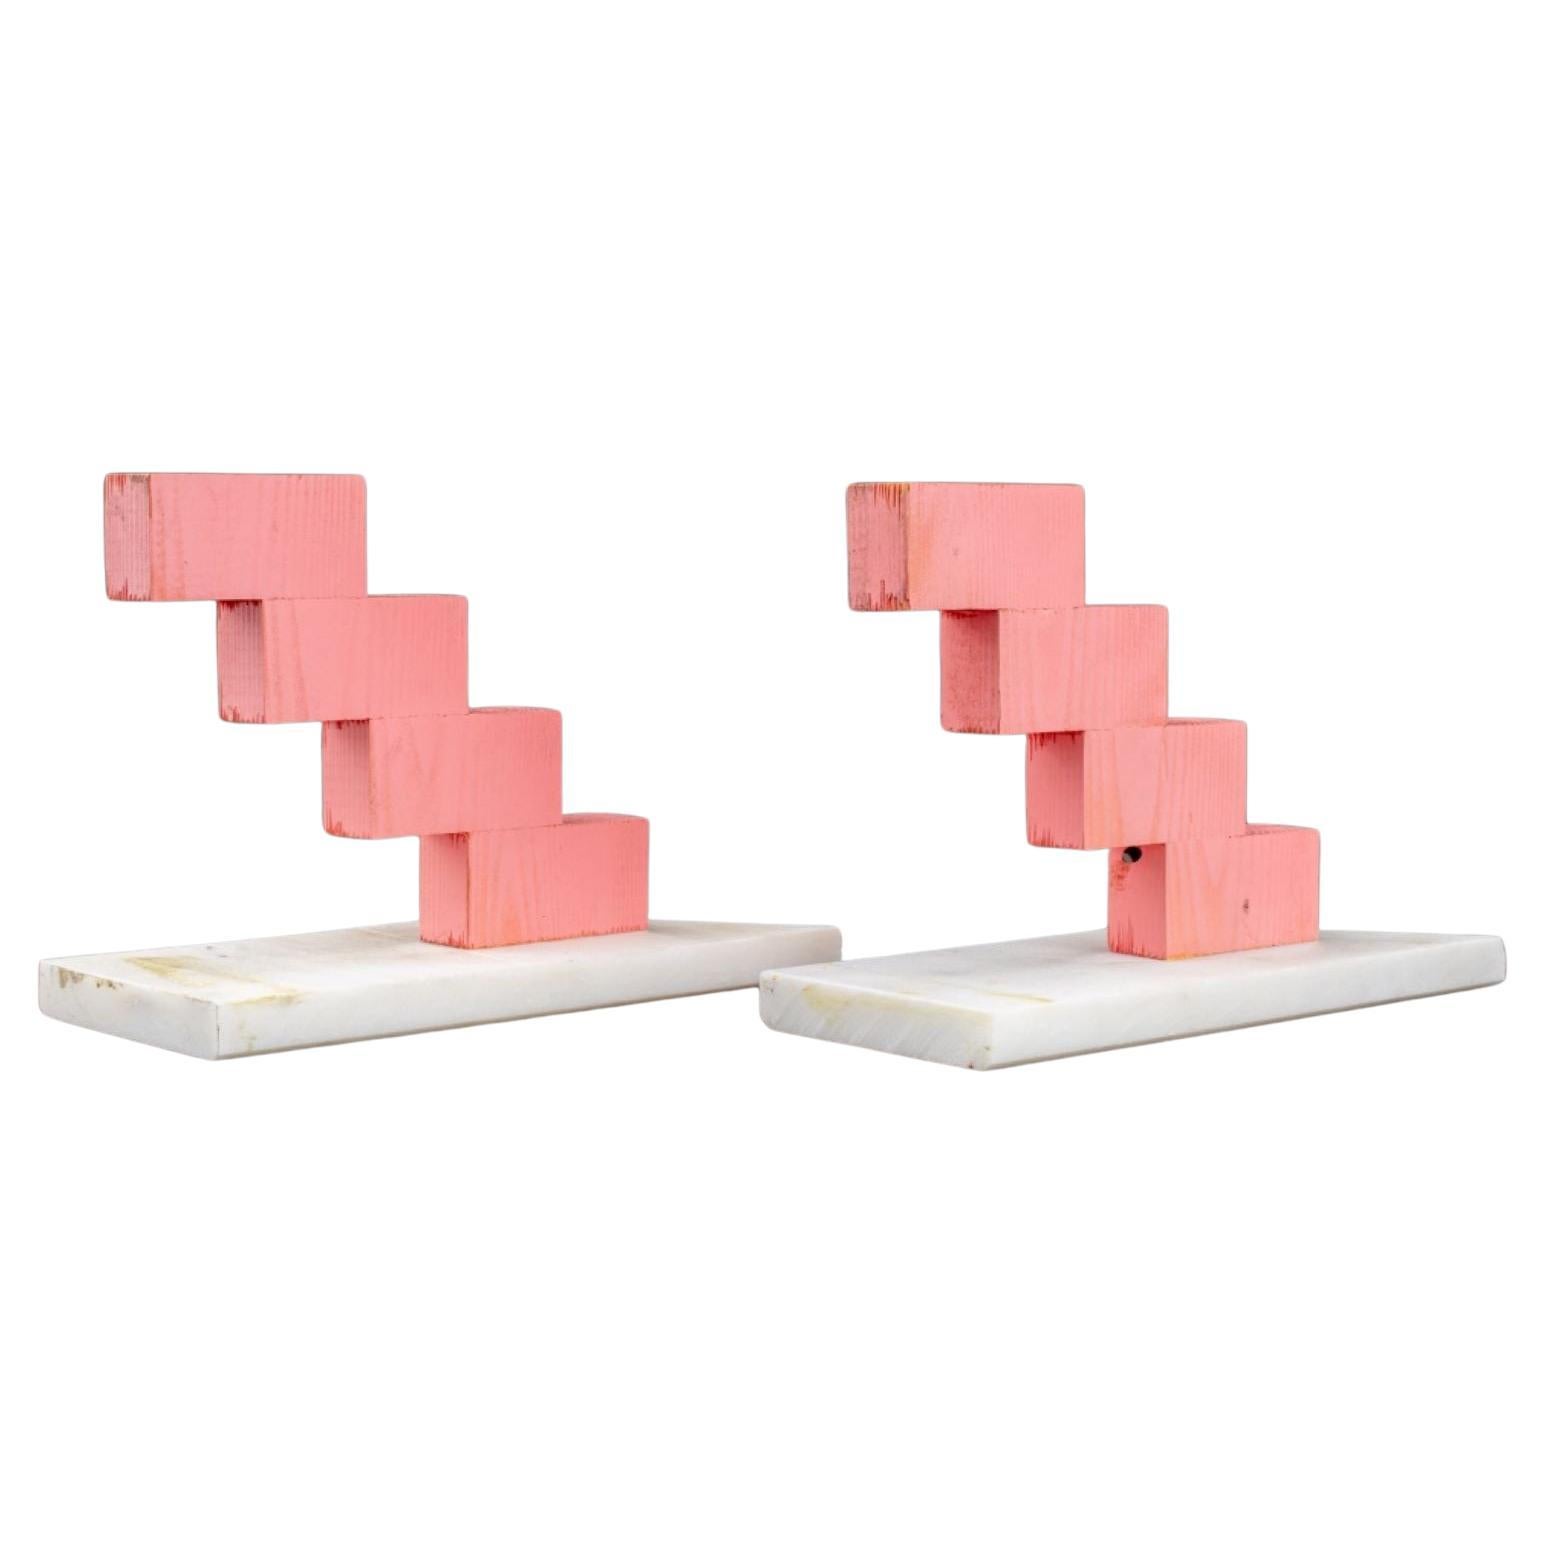 Pair of Painted Wood Zig-Zag Bookends, Mid 20th C For Sale